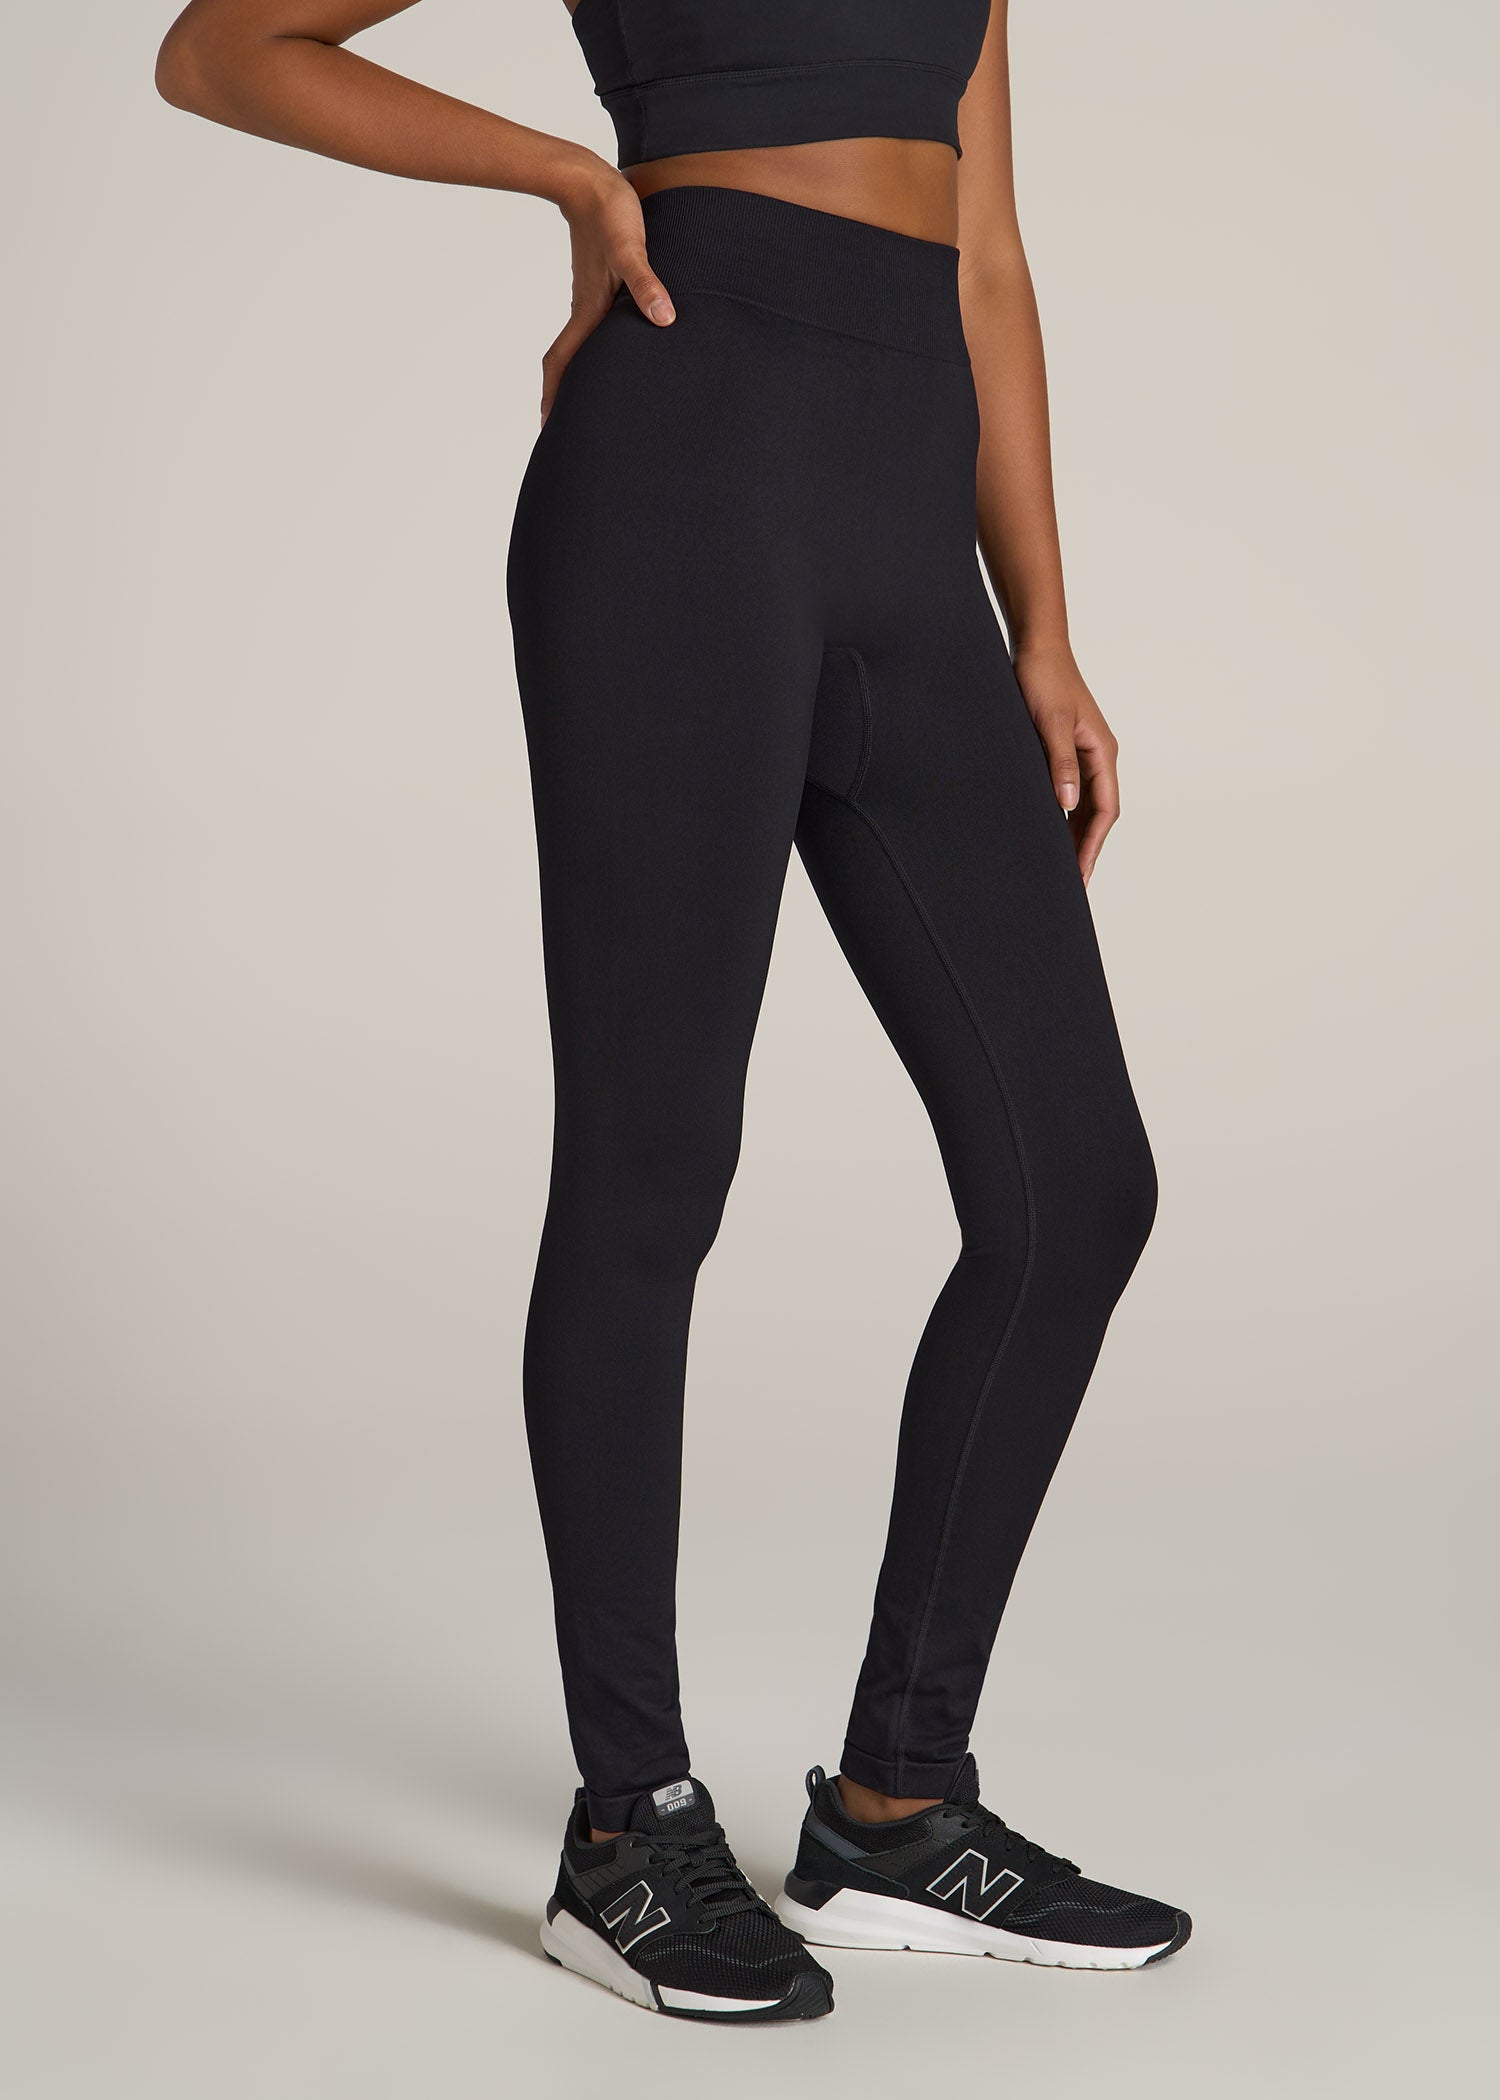 American-Tall-Women-Seamless-Compression-Legging-Solid-Black-side